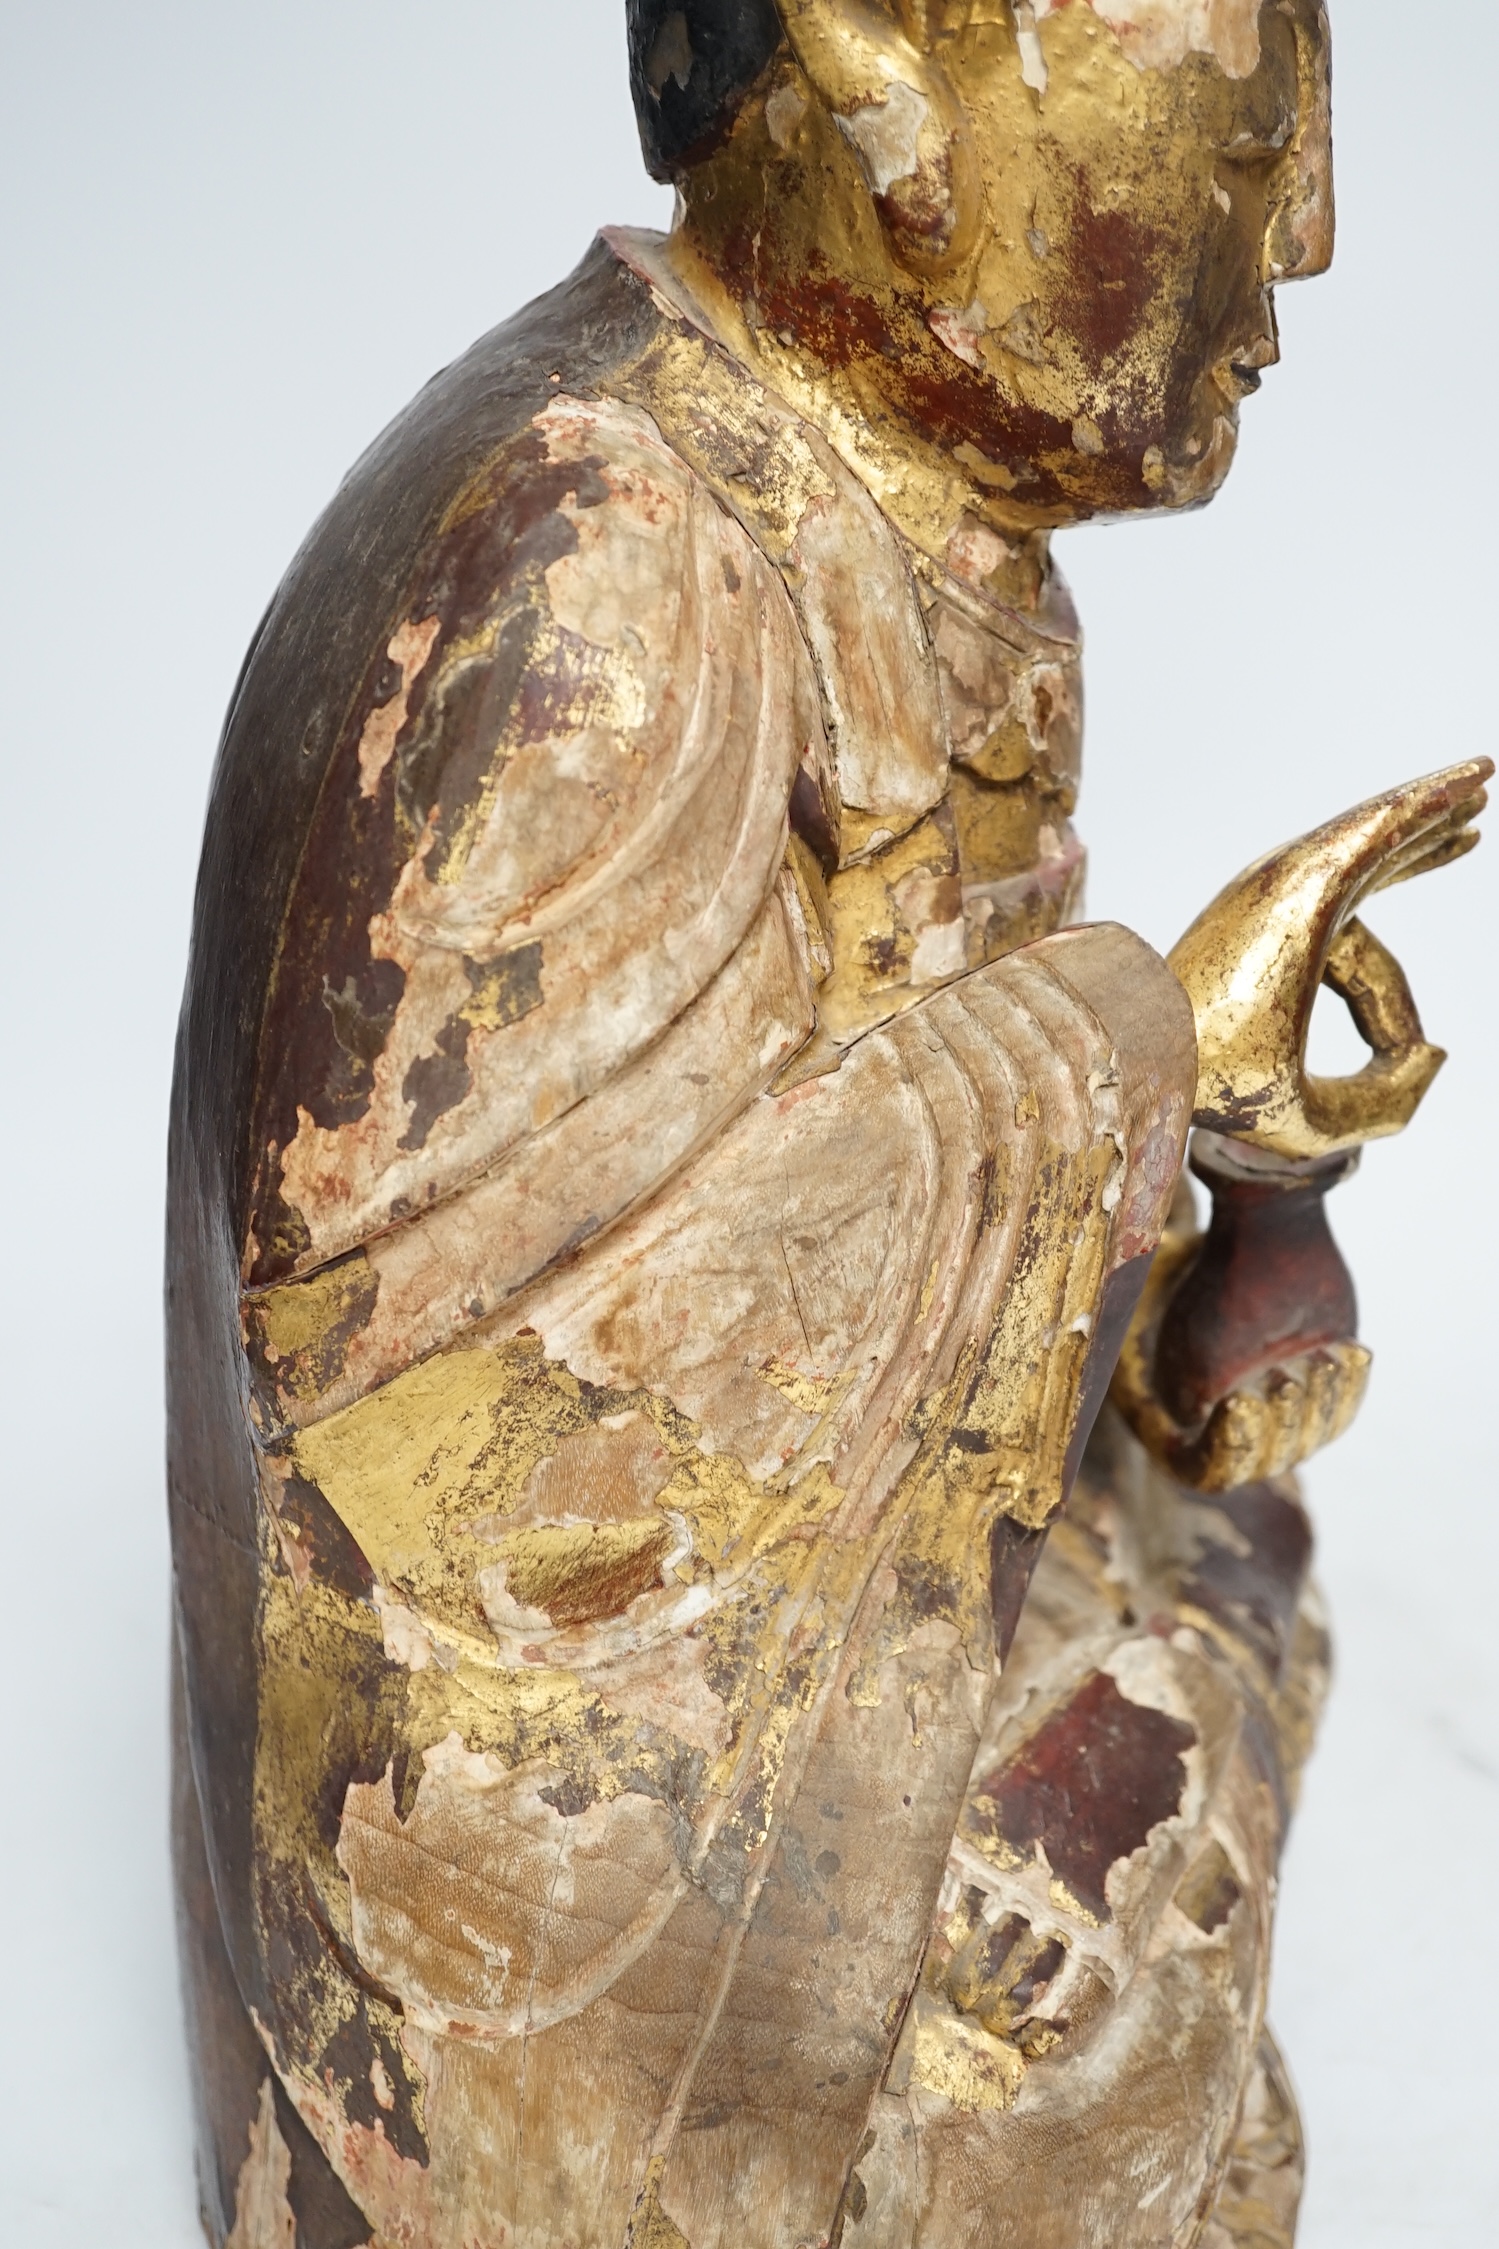 A Chinese gilt lacquered wooden figure of Buddha, possibly Yuan to Ming, 42cm high. Condition - poor to fair, losses to lacquer overall